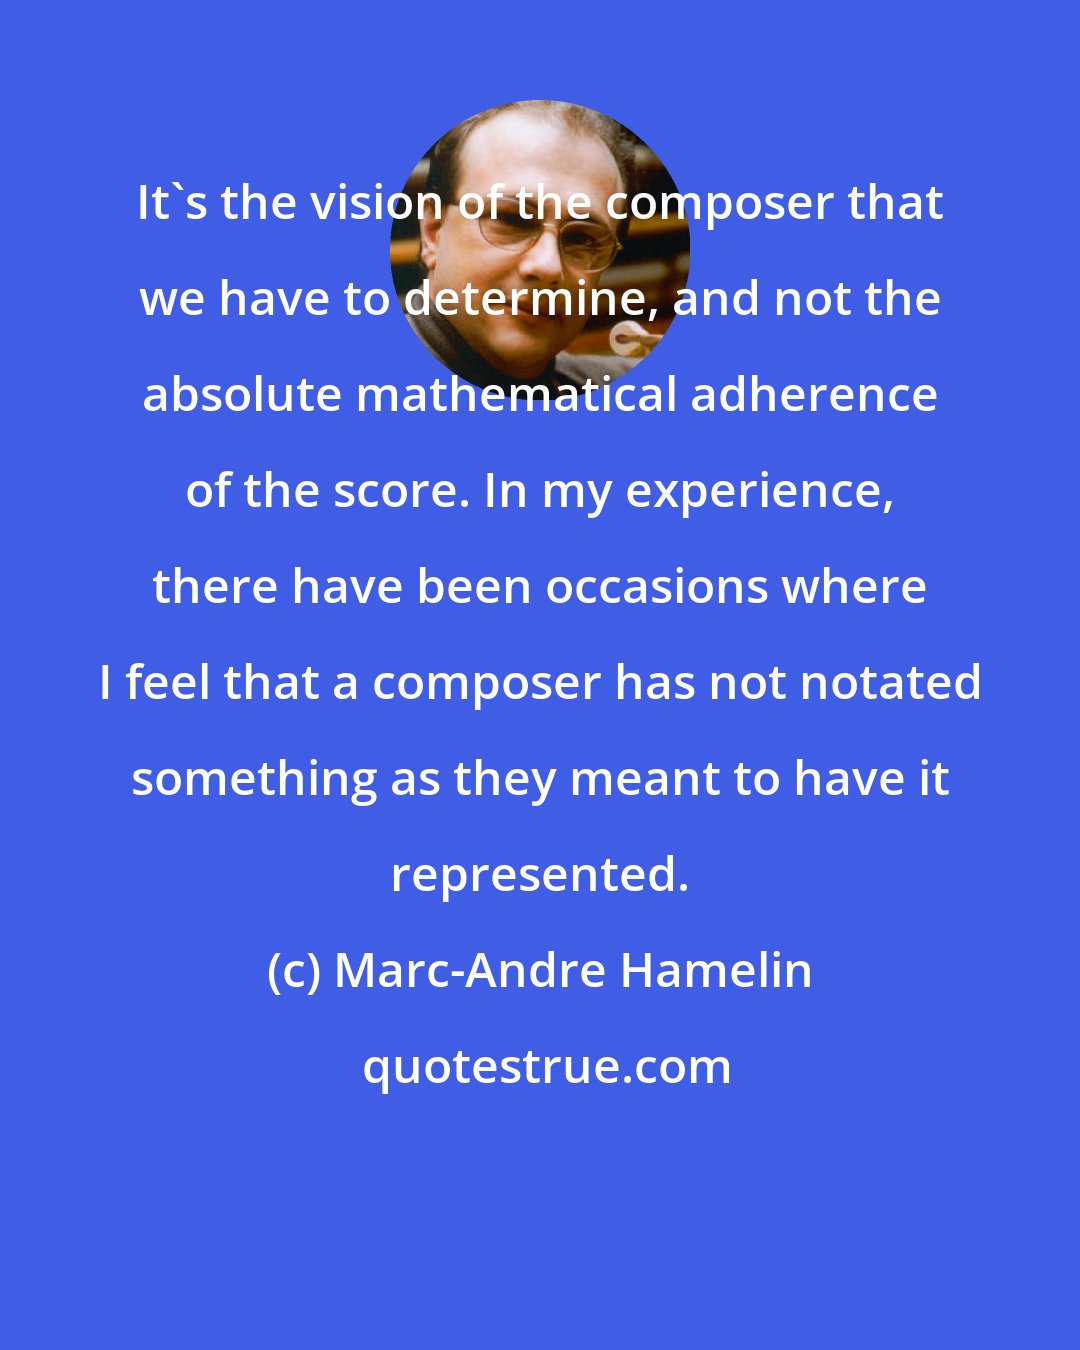 Marc-Andre Hamelin: It's the vision of the composer that we have to determine, and not the absolute mathematical adherence of the score. In my experience, there have been occasions where I feel that a composer has not notated something as they meant to have it represented.